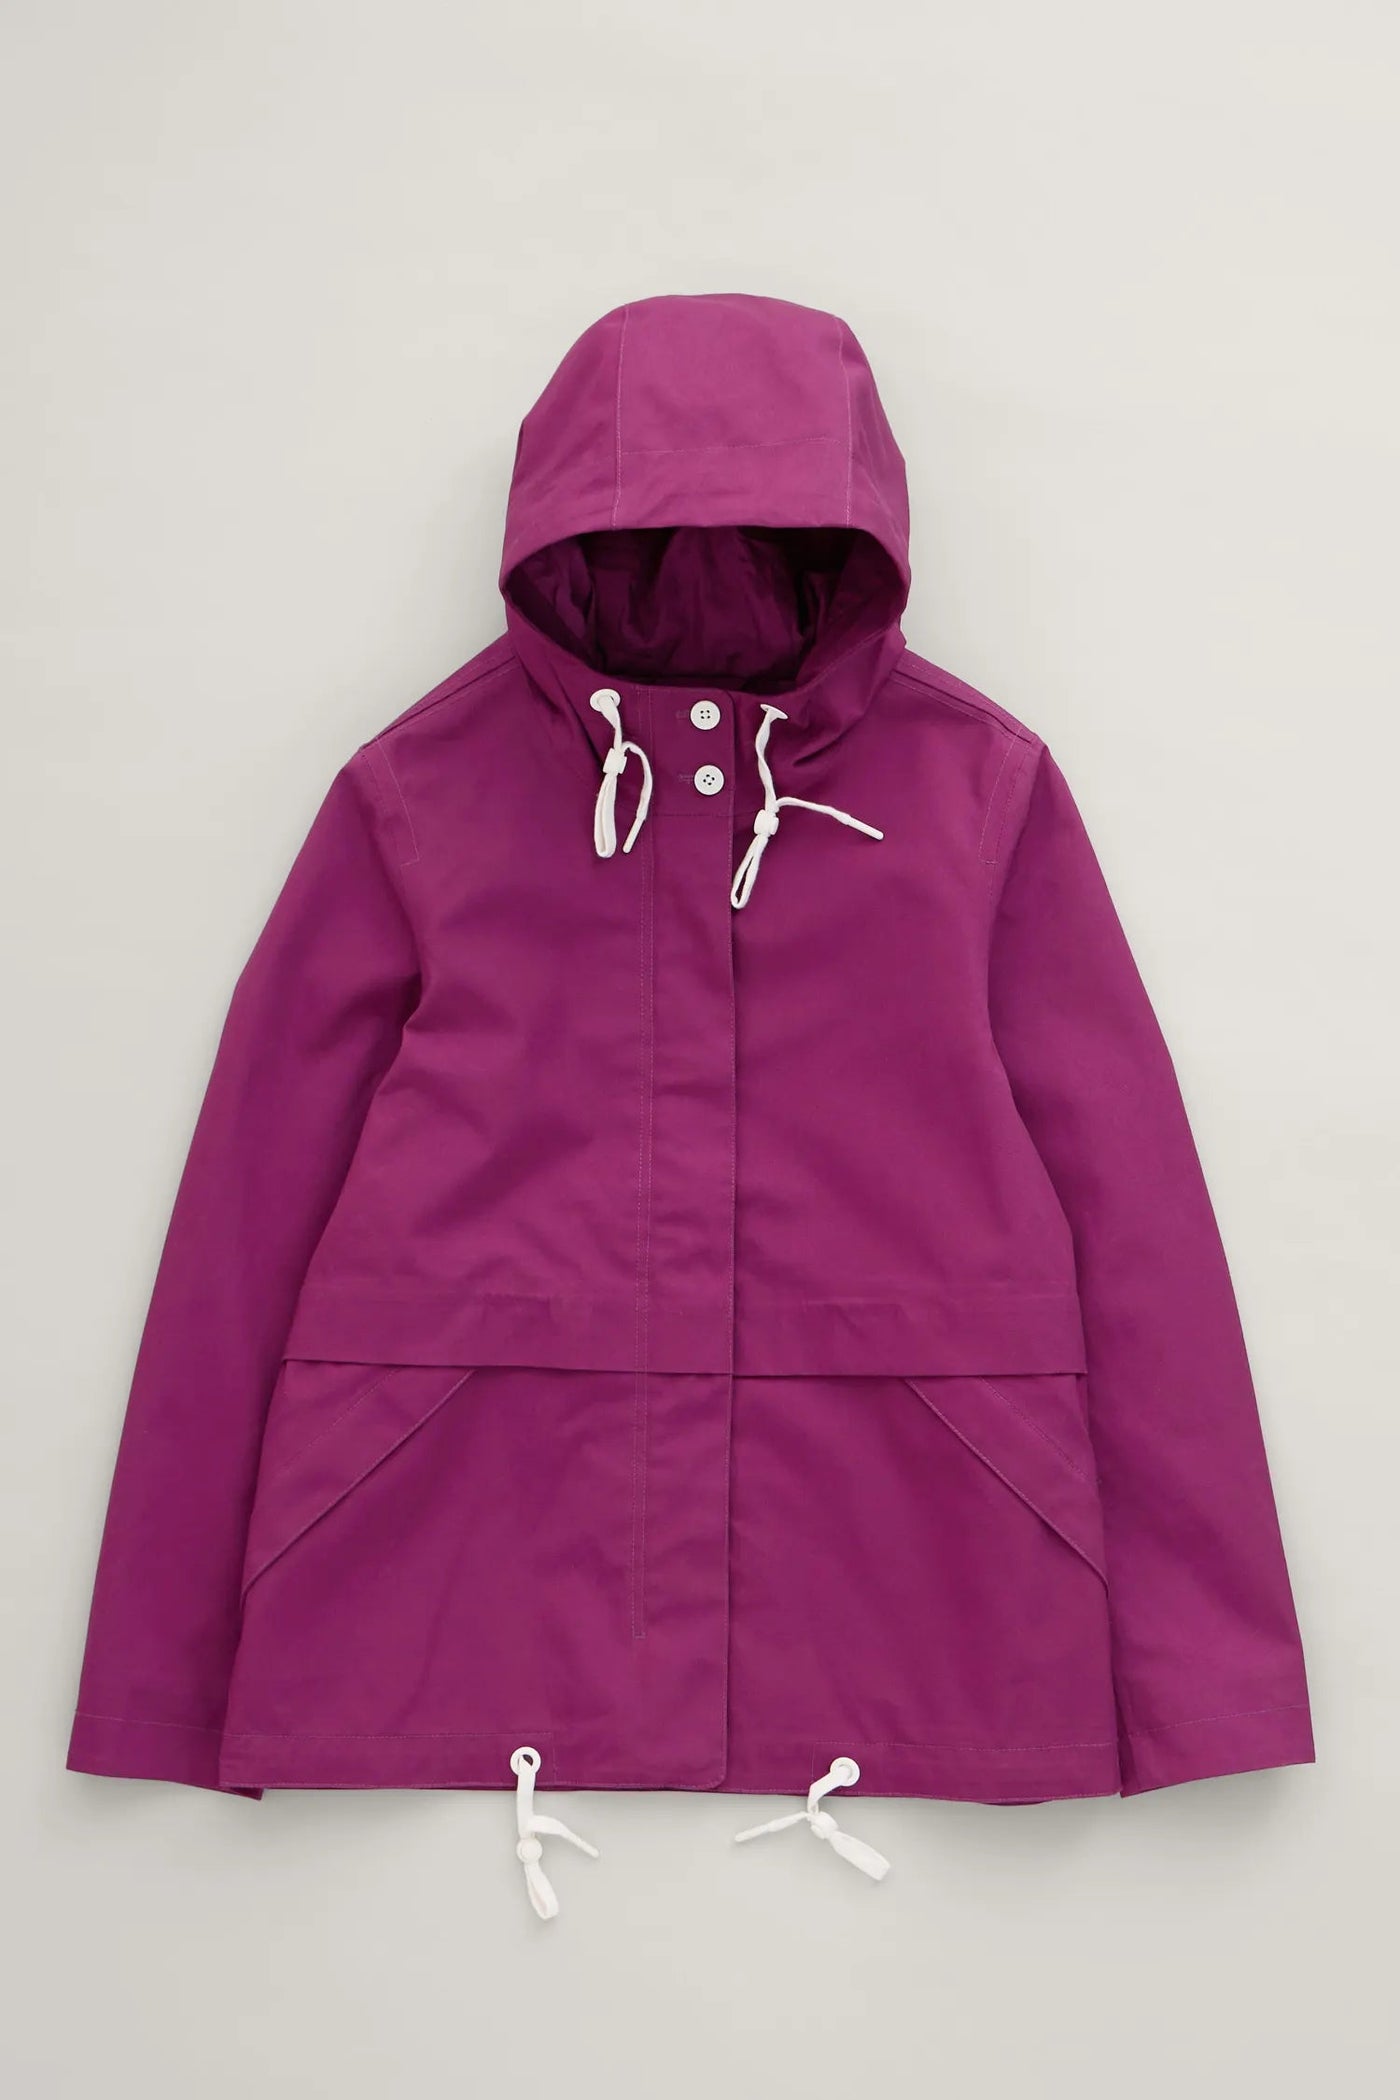 Seasalt Blue Depth Jacket - Cassis-Womens-Ohh! By Gum - Shop Sustainable